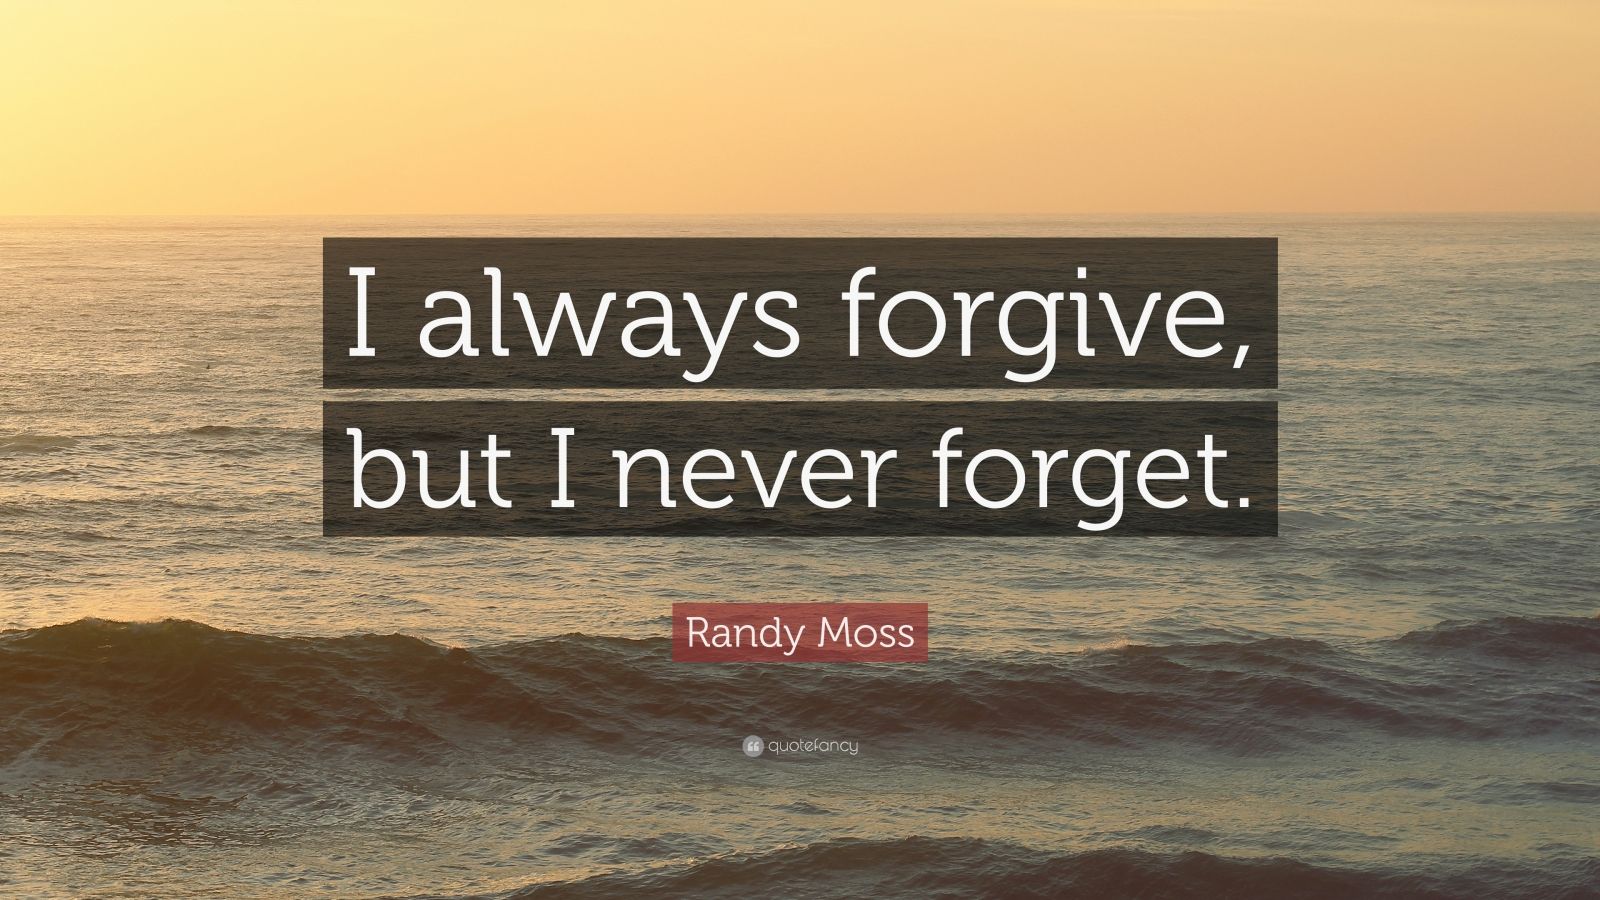 Randy Moss Quote “i Always Forgive But I Never Forget” 7 Wallpapers Quotefancy